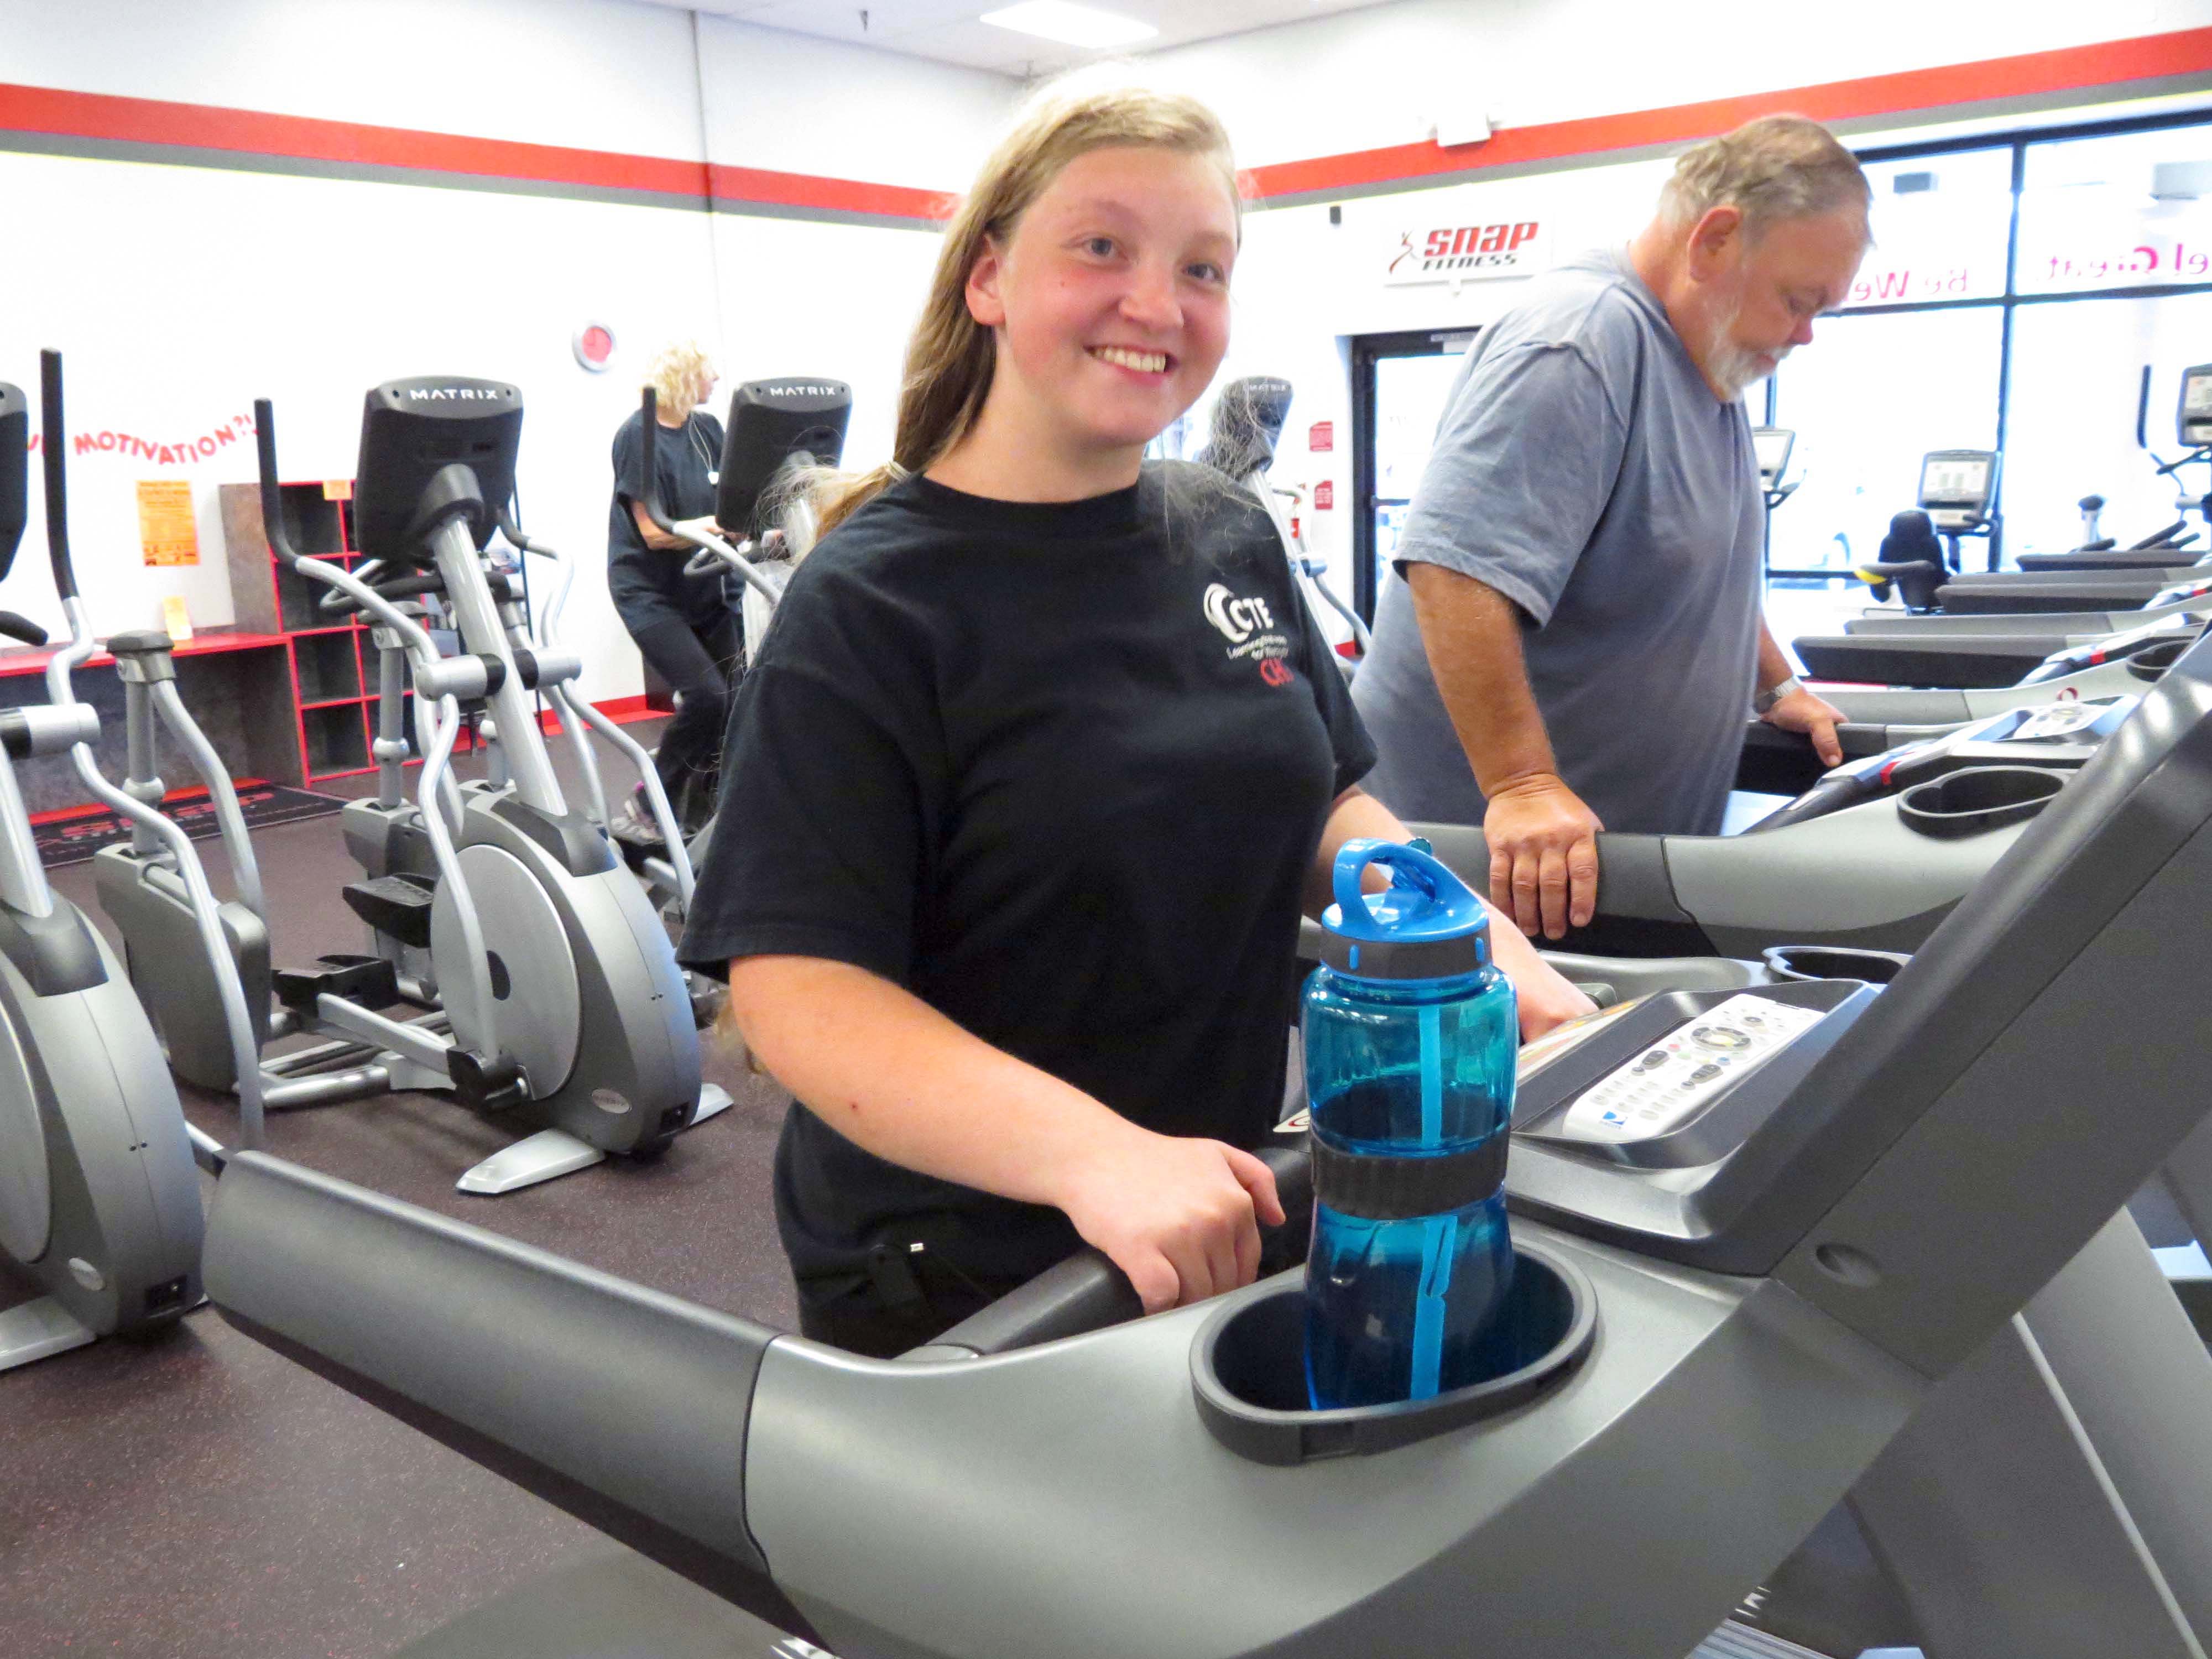 Mary McFarland of Camas (left) and Ron Winders of Washougal (right) build strength and endurance on the treadmills at SNAP Fitness in Camas. McFarland was born with a brain defect and had her hip replaced at the age of 13. Winders, 62, is going in for knee replacement surgery.